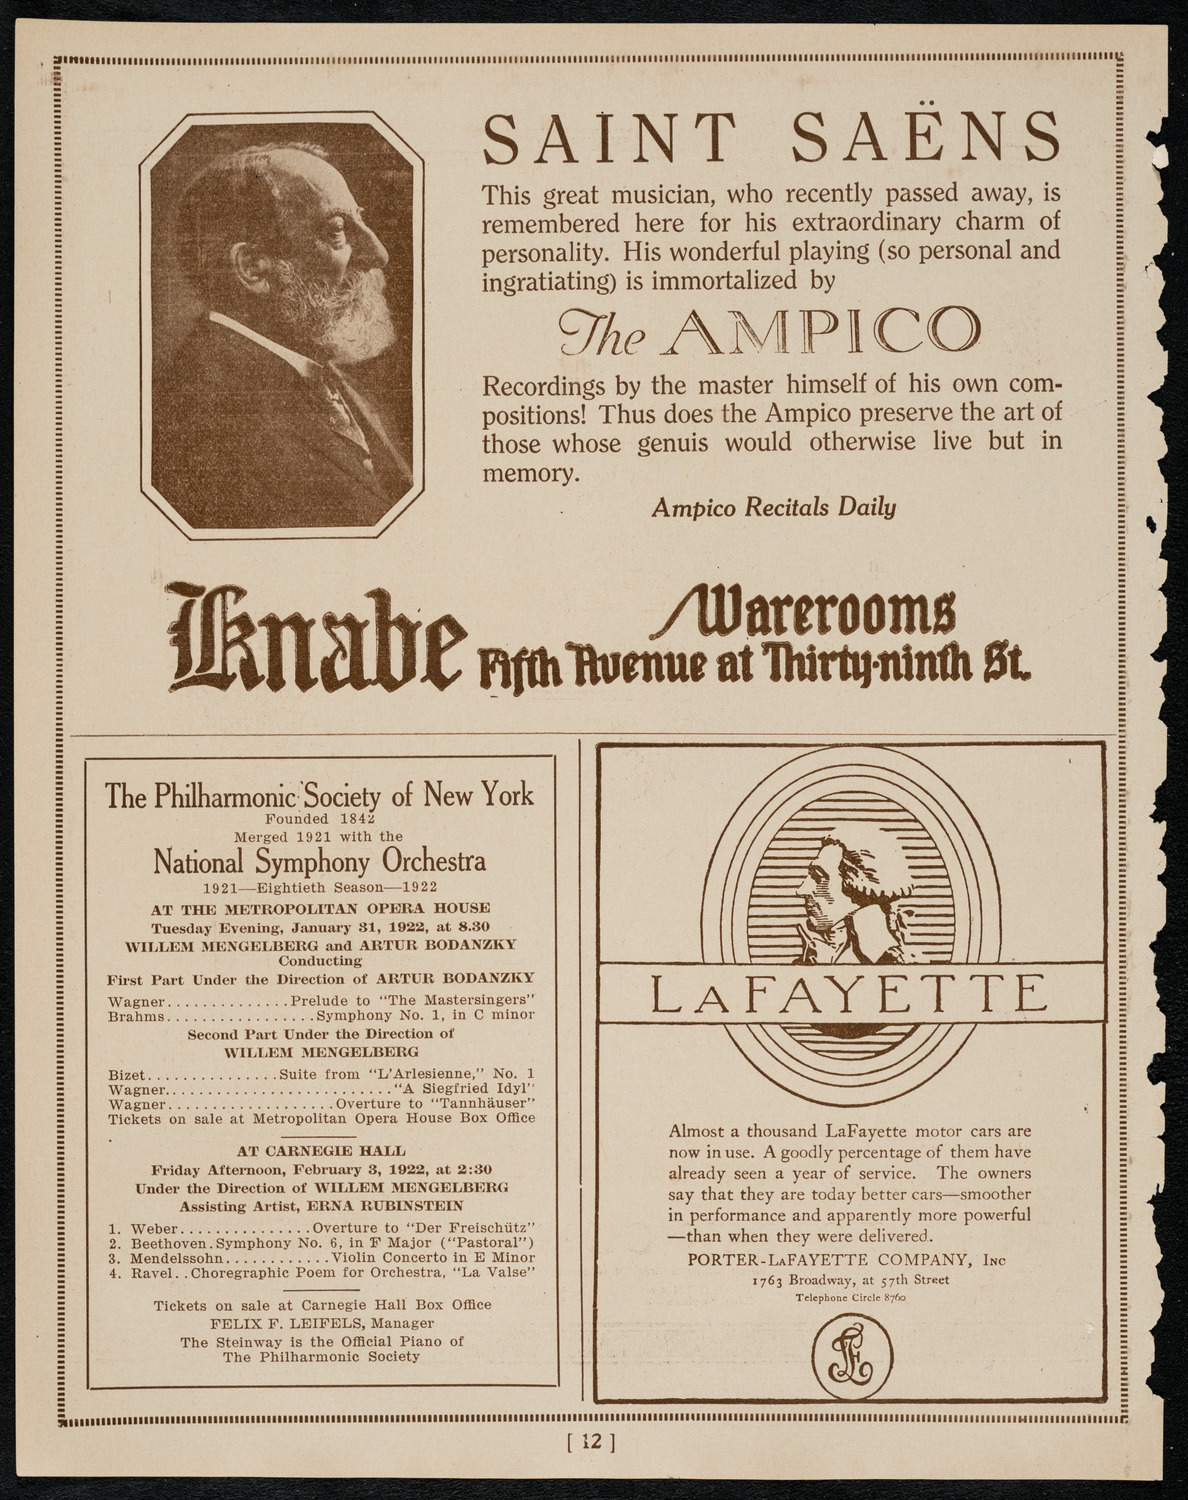 Mecca Temple of New York: Ancient Arabic Order of the Nobles of the Mystic Shrine, January 30, 1922, program page 12